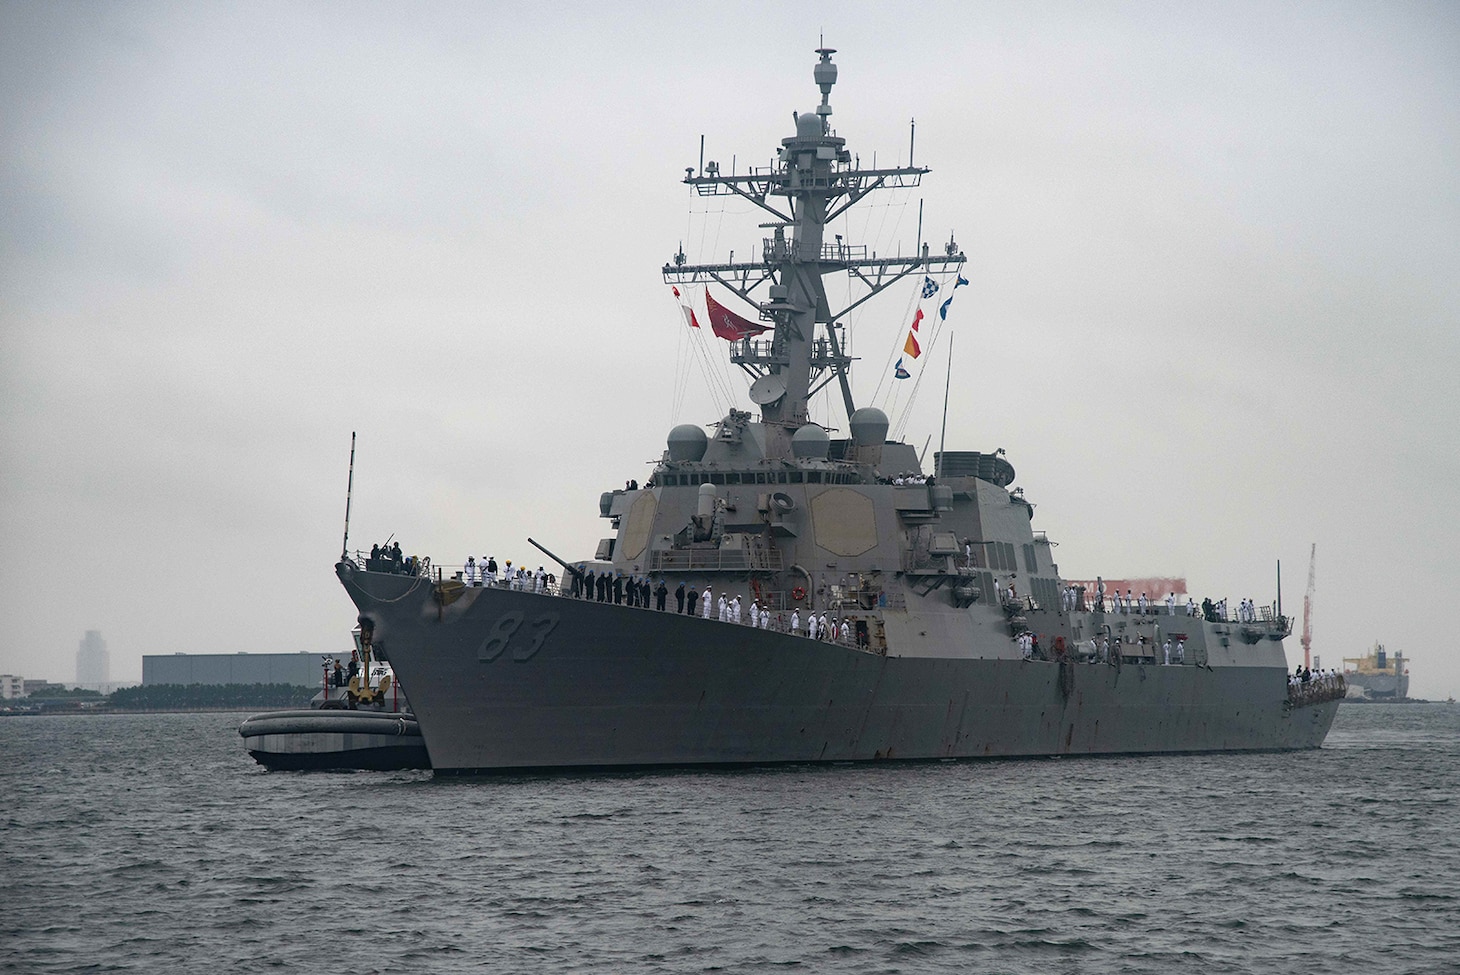 The Arleigh Burke-class guided-missile destroyer USS Howard (DDG 83) arrives at Commander, Fleet Activities Yokosuka (CFAY), Japan Aug. 16 as one of the newest additions to Commander, Task Force (CTF) 71/Destroyer Squadron (DESRON) 15. Howard is assigned to CTF 71/DESRON 15, the Navy’s largest forward deployed DESRON and the U.S. 7th Fleet’s principle surface force.